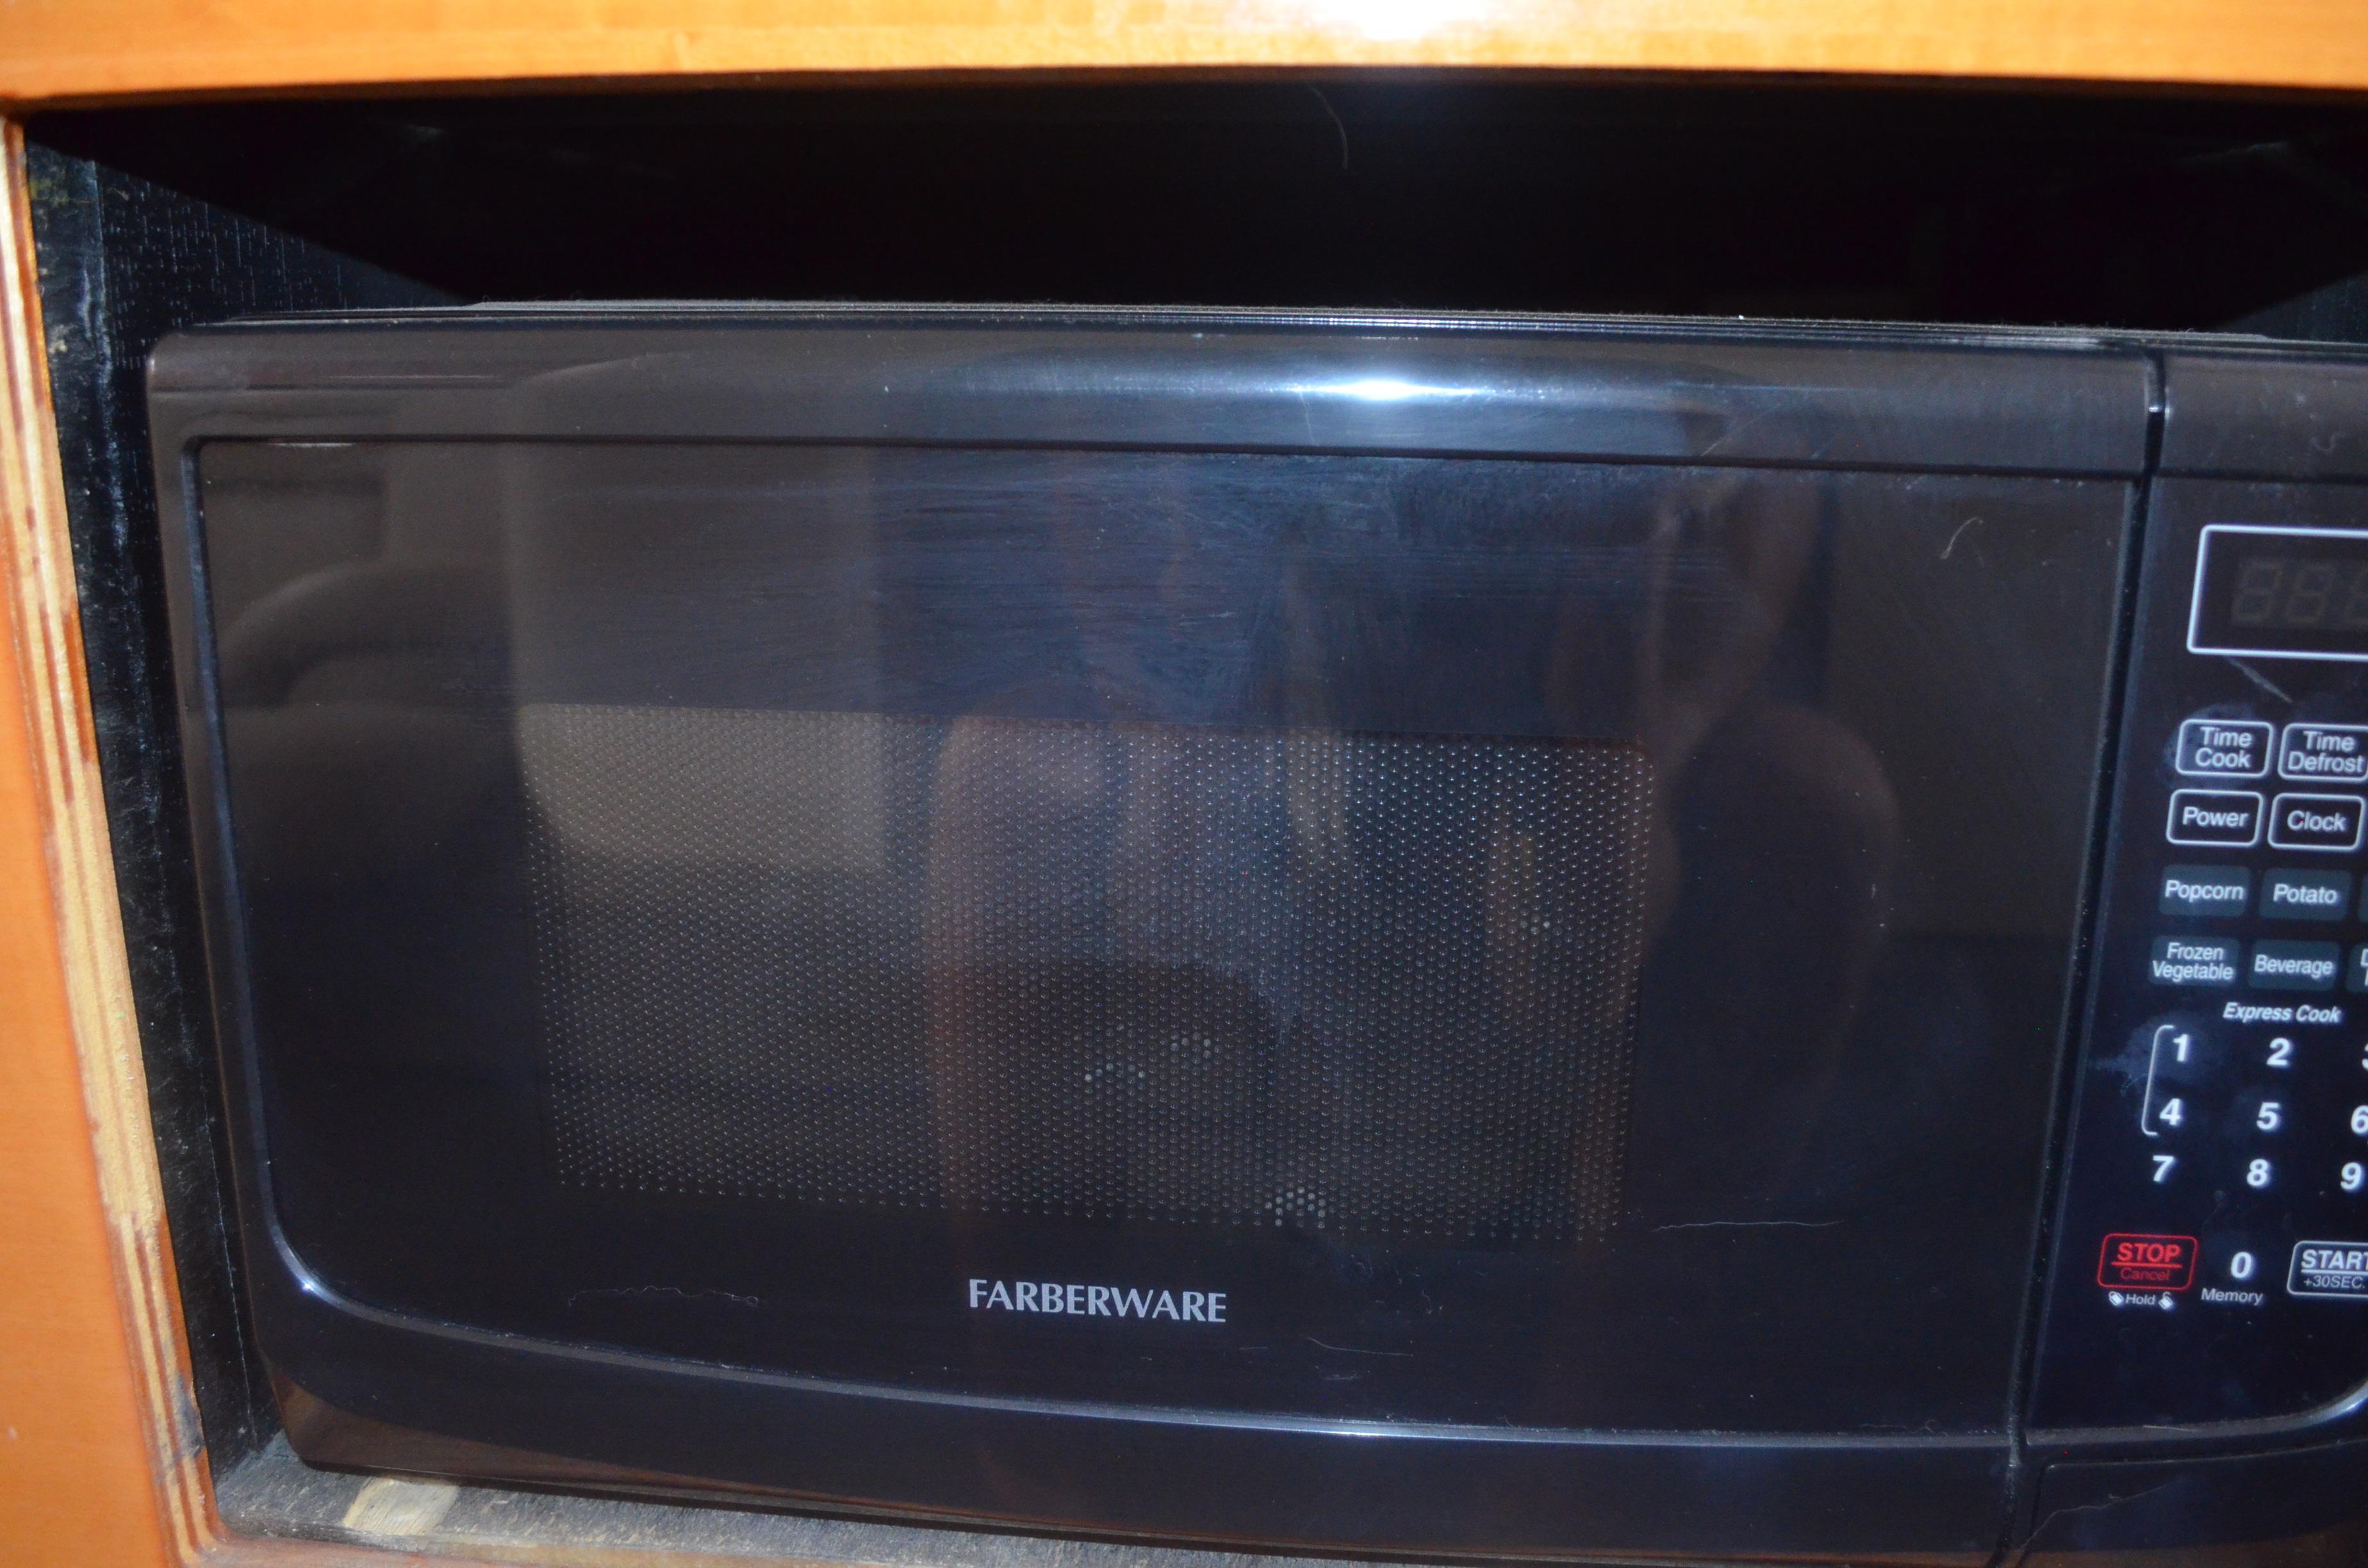 Farberware Classic FMO07ABTBKA Microwave Oven Review - Consumer Reports